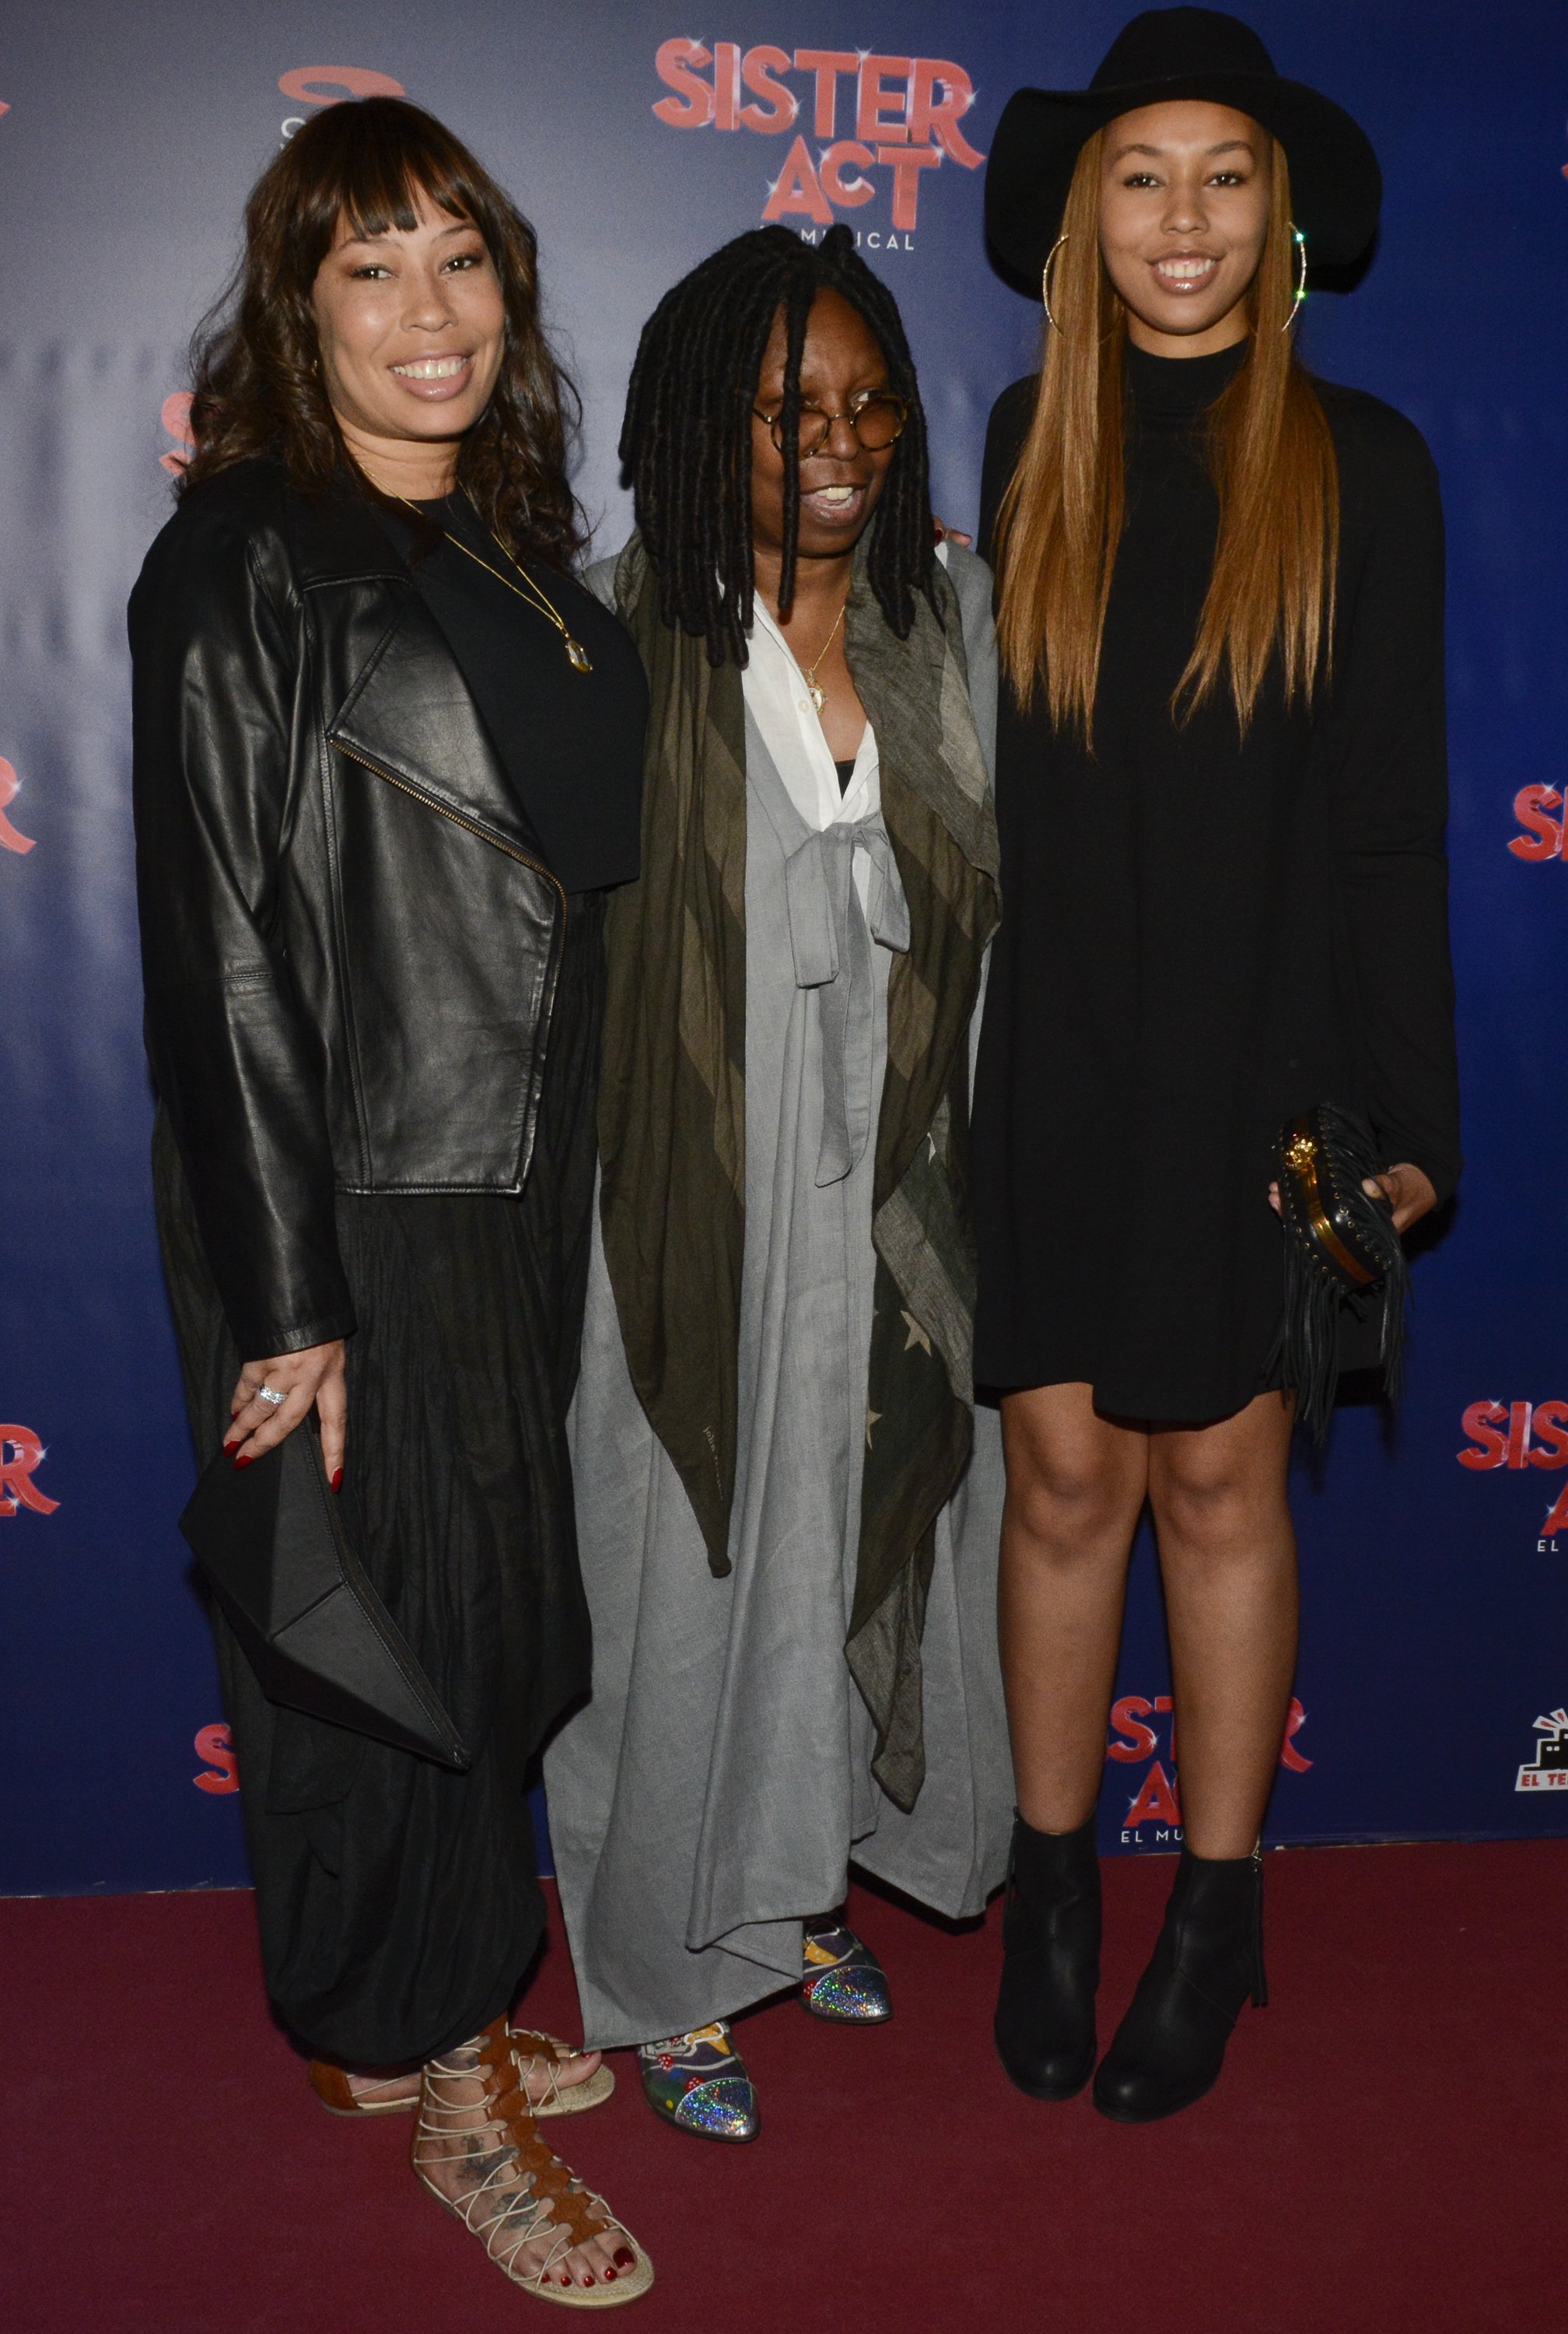 (L-R) Alex Martin, Whoopi Goldberg and Alex’s daughter Jerzey Martin at the premiere of 'Sister Act' on Oct. 23, 2014 in Barcelona, Spain. |Photo: Getty Images